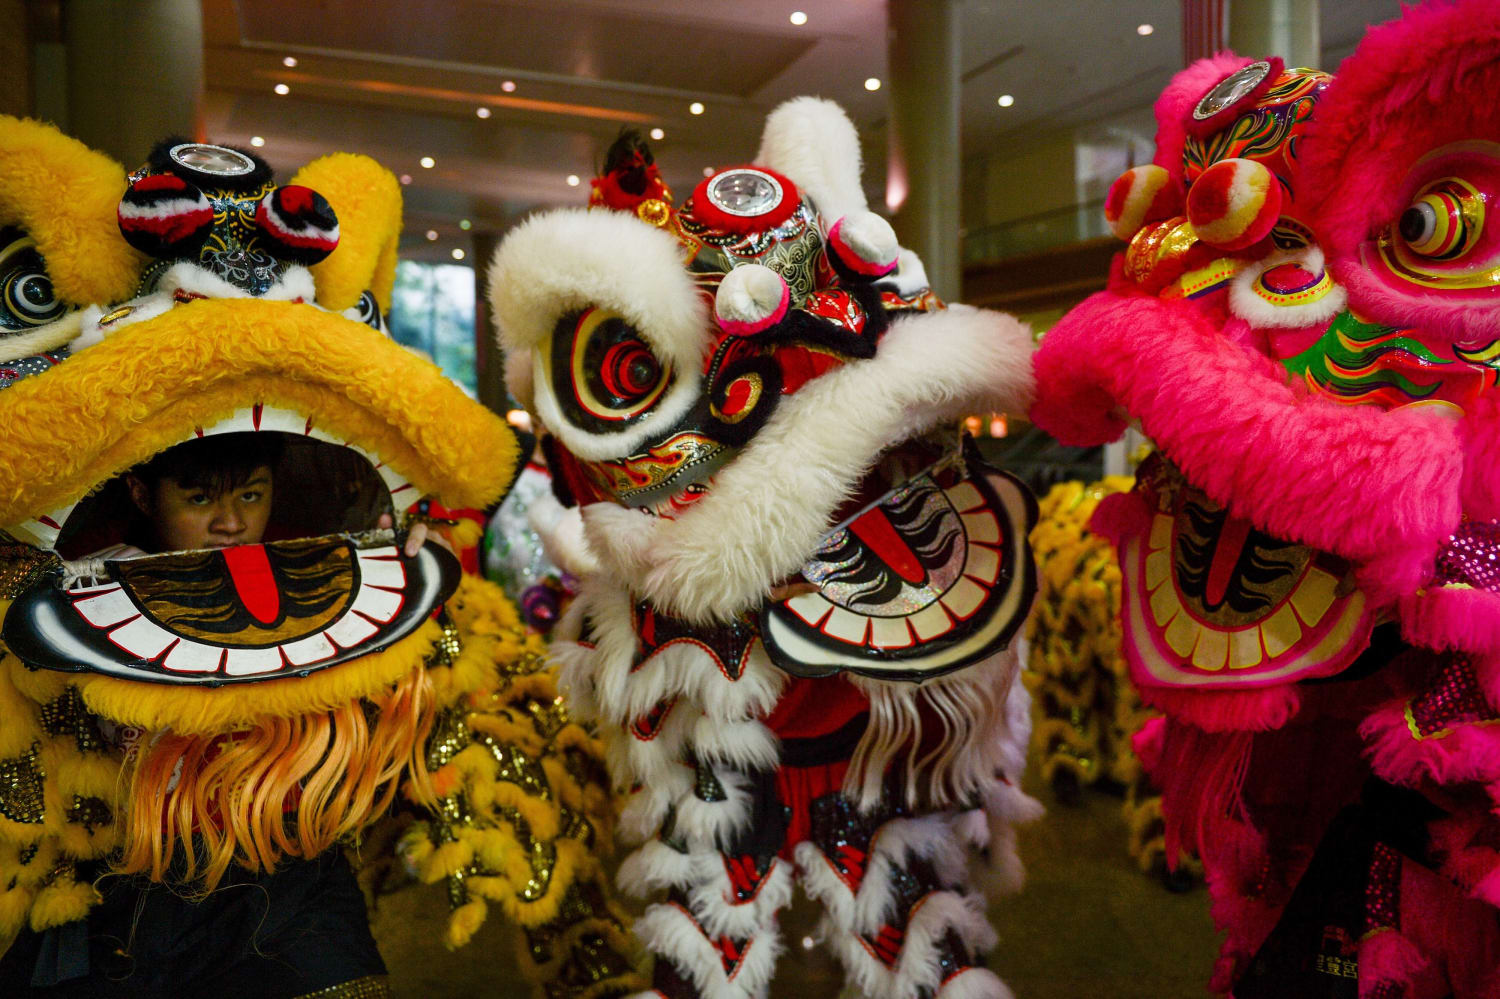 Celebrations Acrobatics And Chasing Nian Lion Dancers Prepare For Lunar New Year